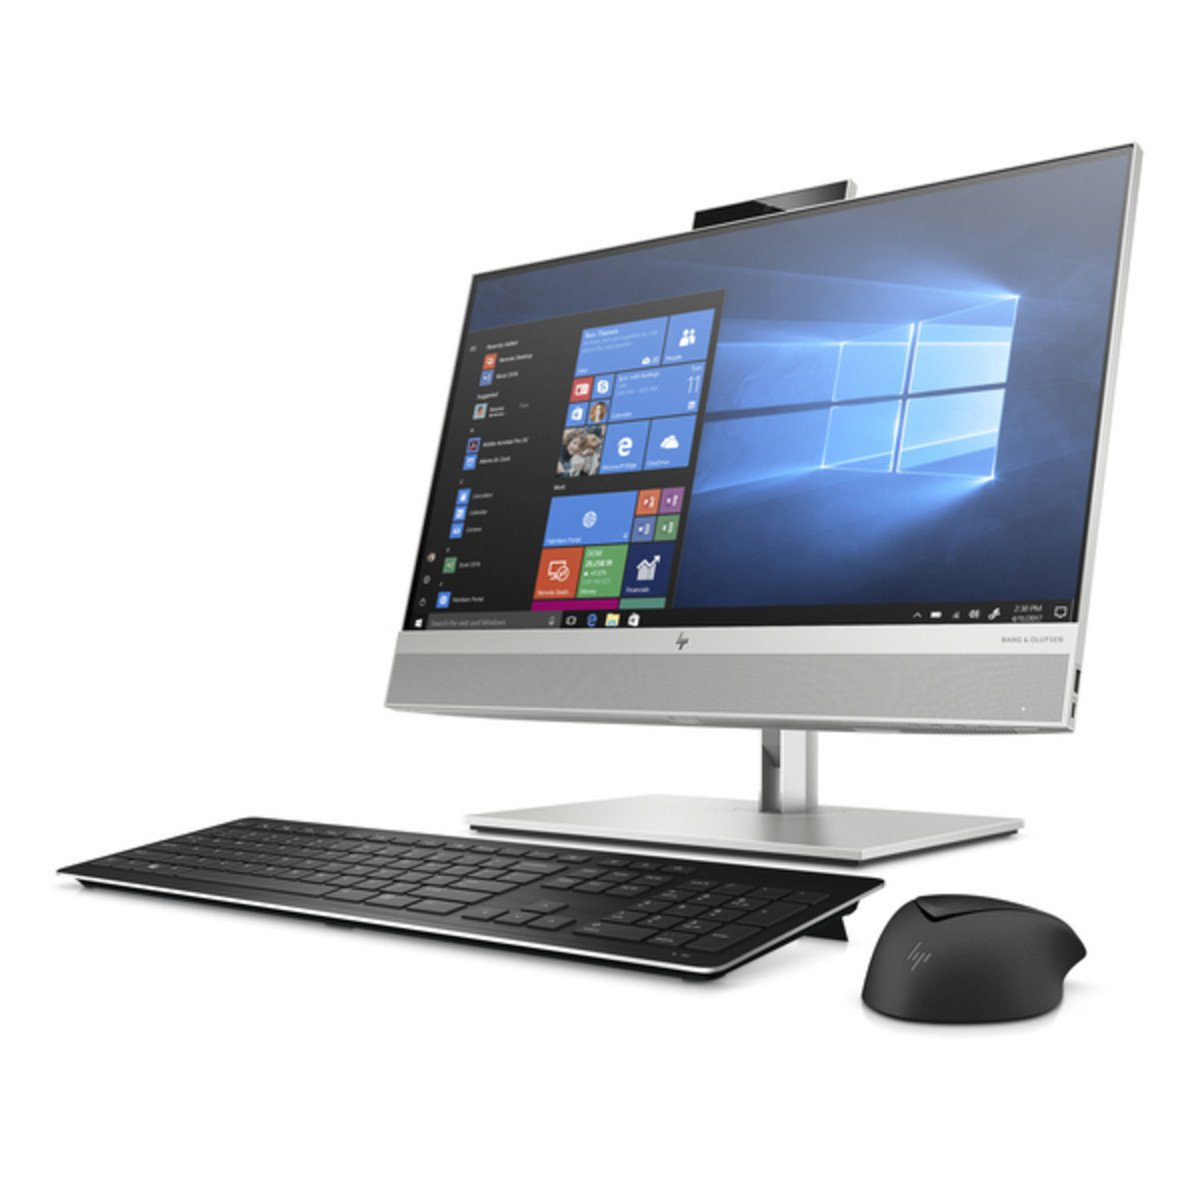 HP EliteOne 800 G6 23.8 Inch i5-10500 4.5GHz 8GB RAM 256GB SSD All-in-One Desktop with Windows 10 Home